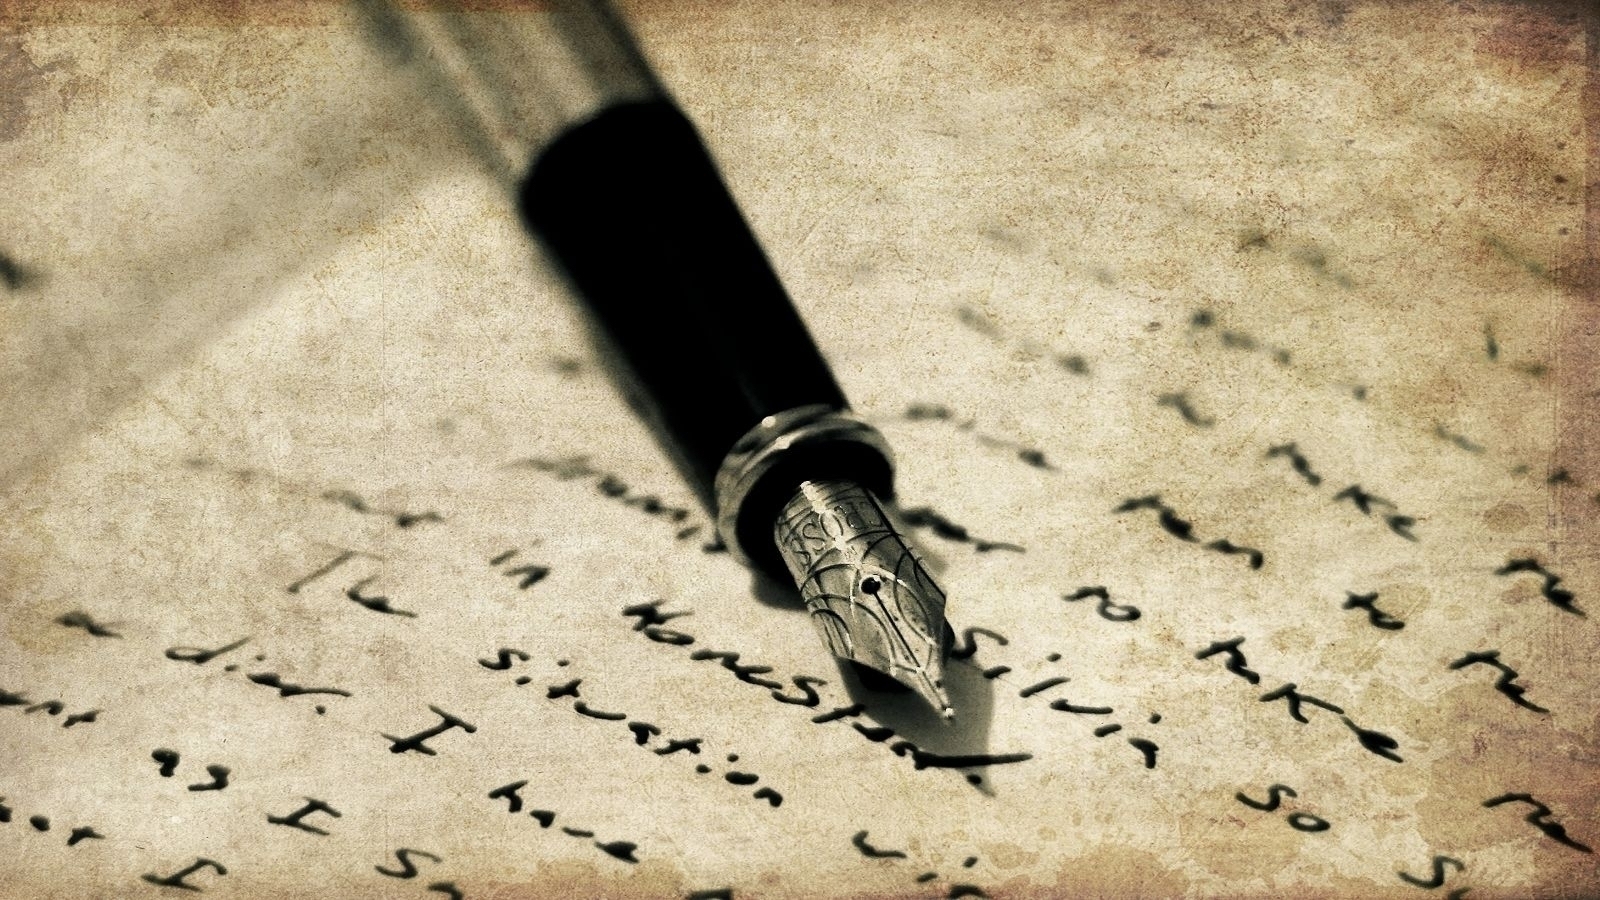 Auto-generated description: A fountain pen lies on a piece of paper filled with handwritten text.